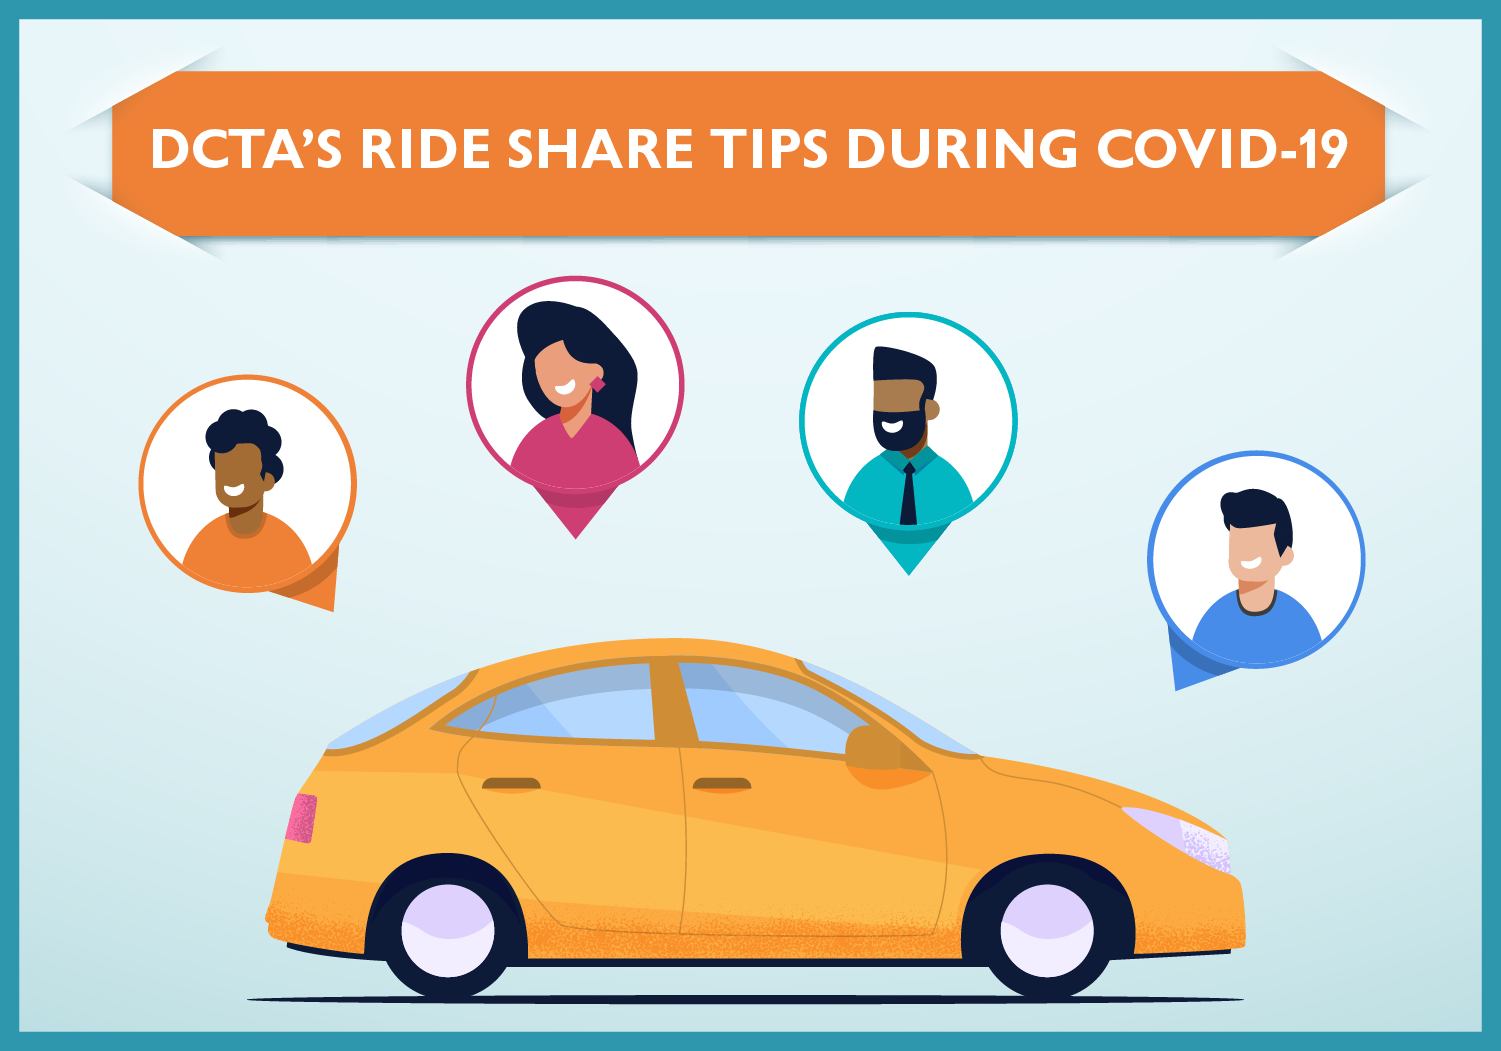 How to Use Ride Share Safely During COVID-19